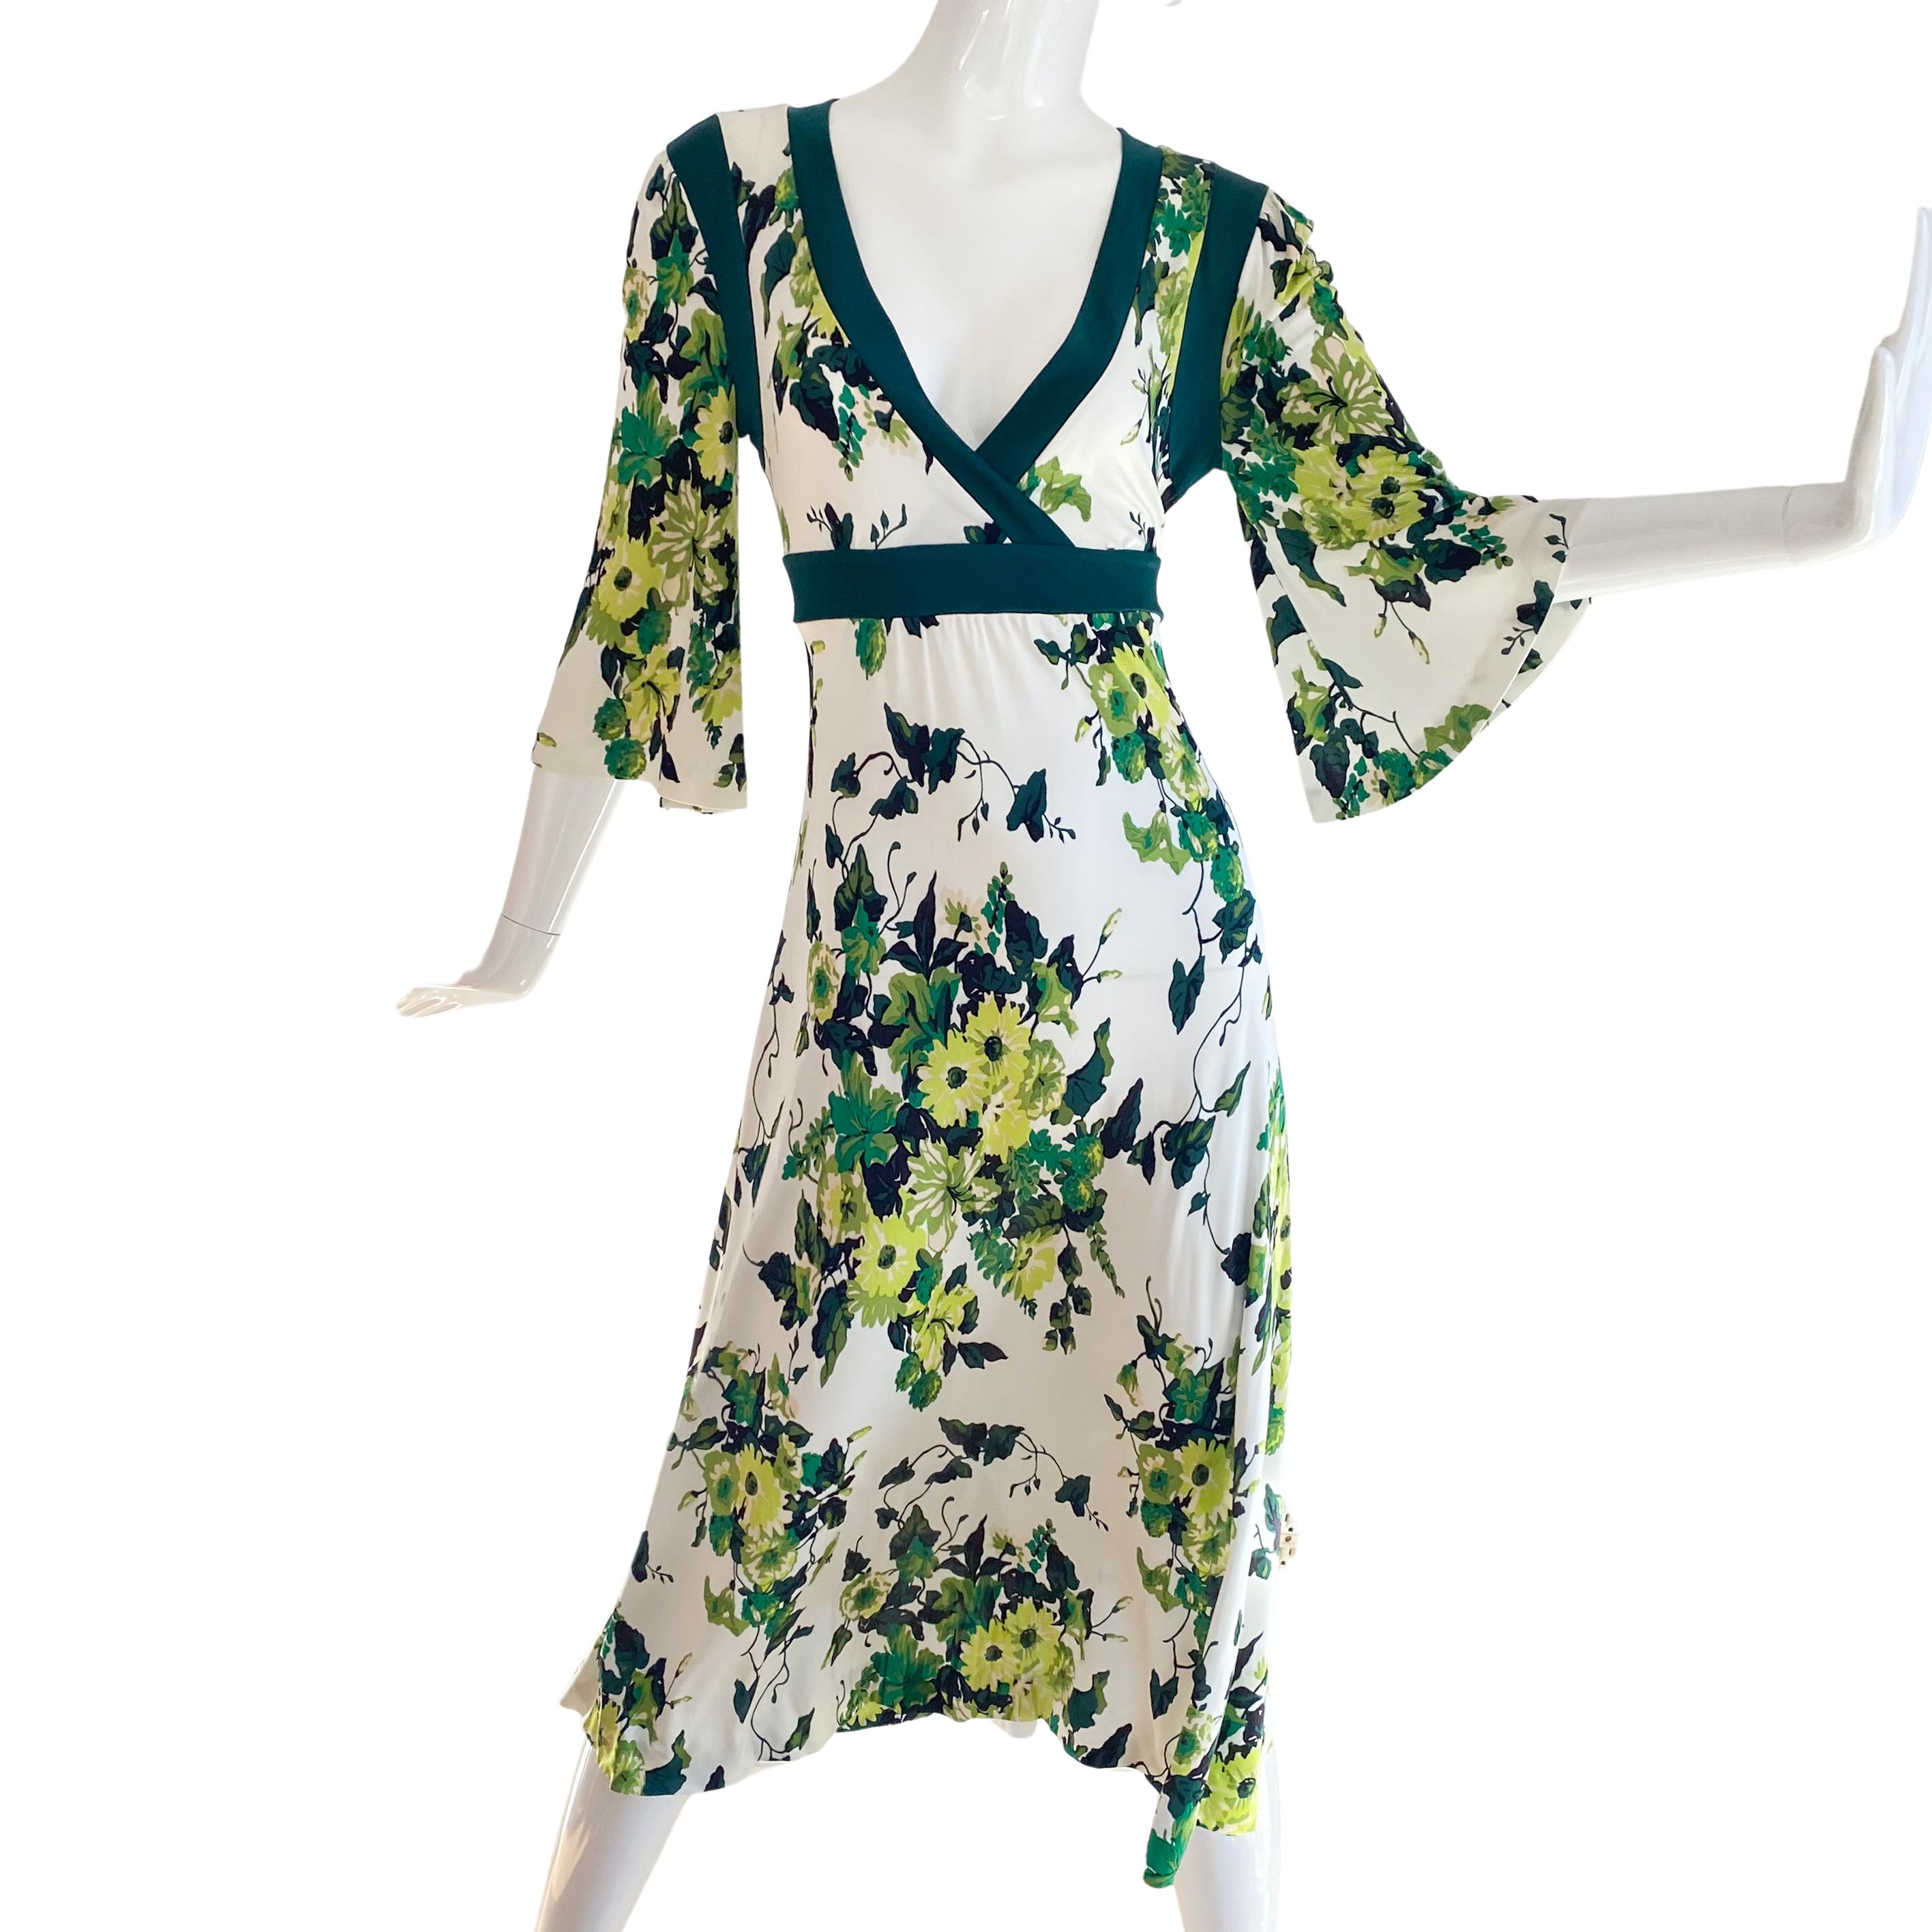 Condition: NEW WITH TAG.
Print: exclusive ivy vine print in shades of green,
Style: Mock wrap with deep green trim and ties in the back for a perfect fit.
          Flare skirt and bell sleeves with lots of movement.
Approximately 48.5